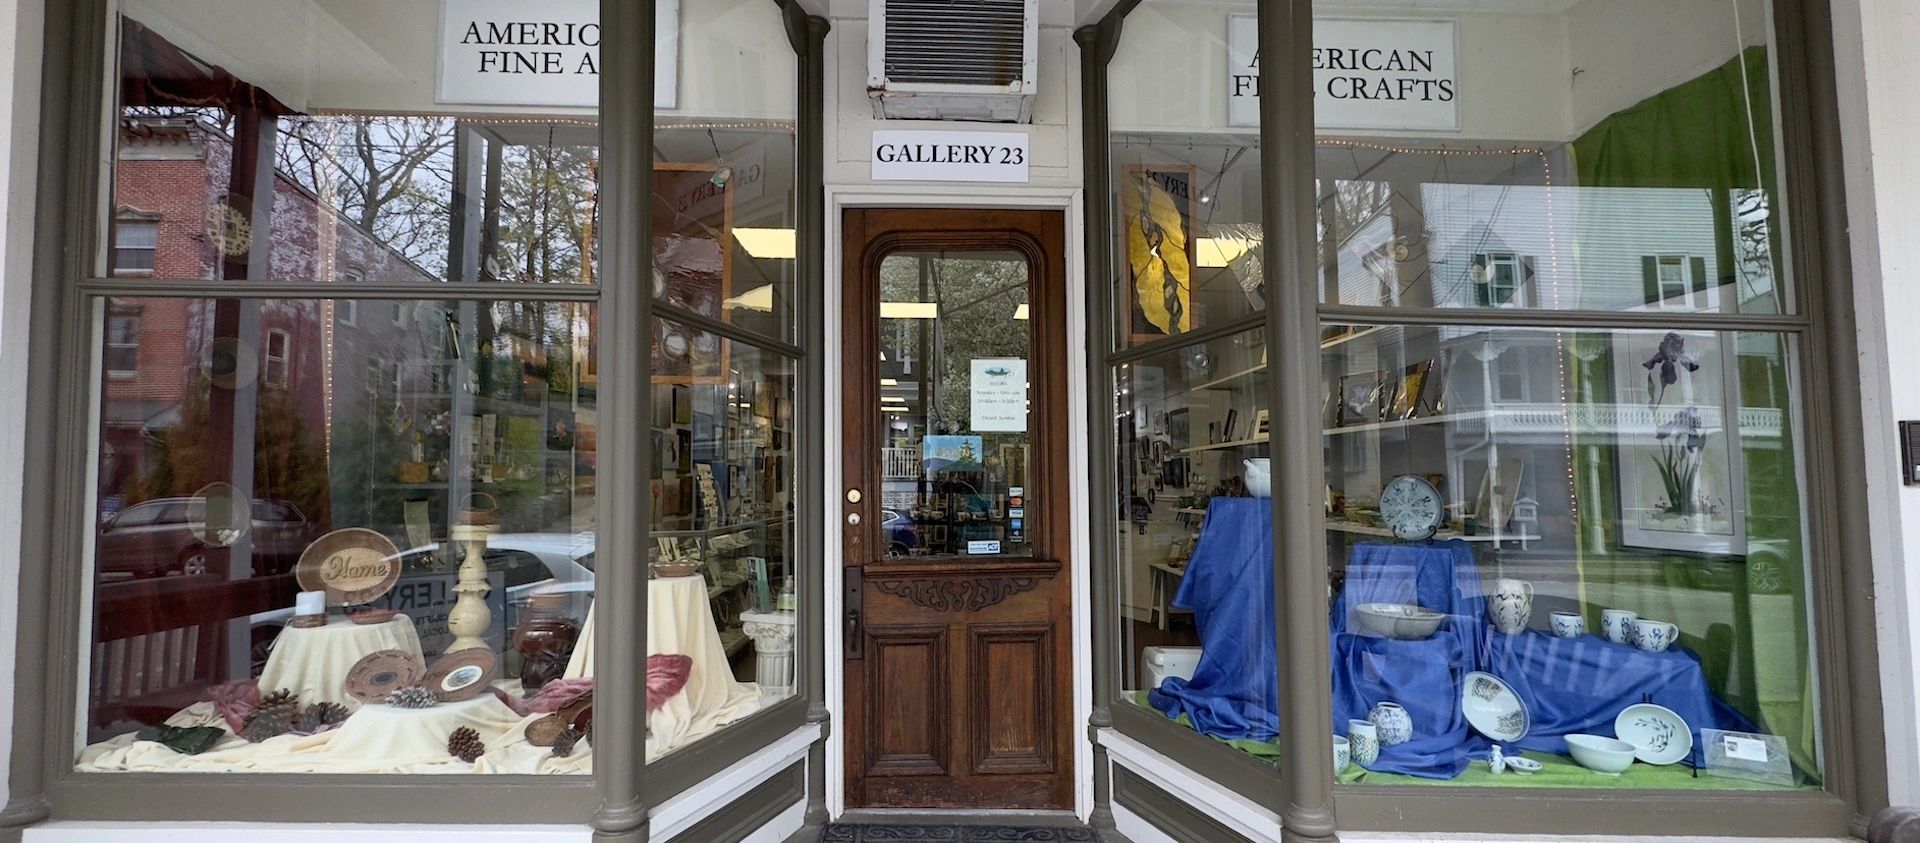 Image of the Gallery 23 front window displays